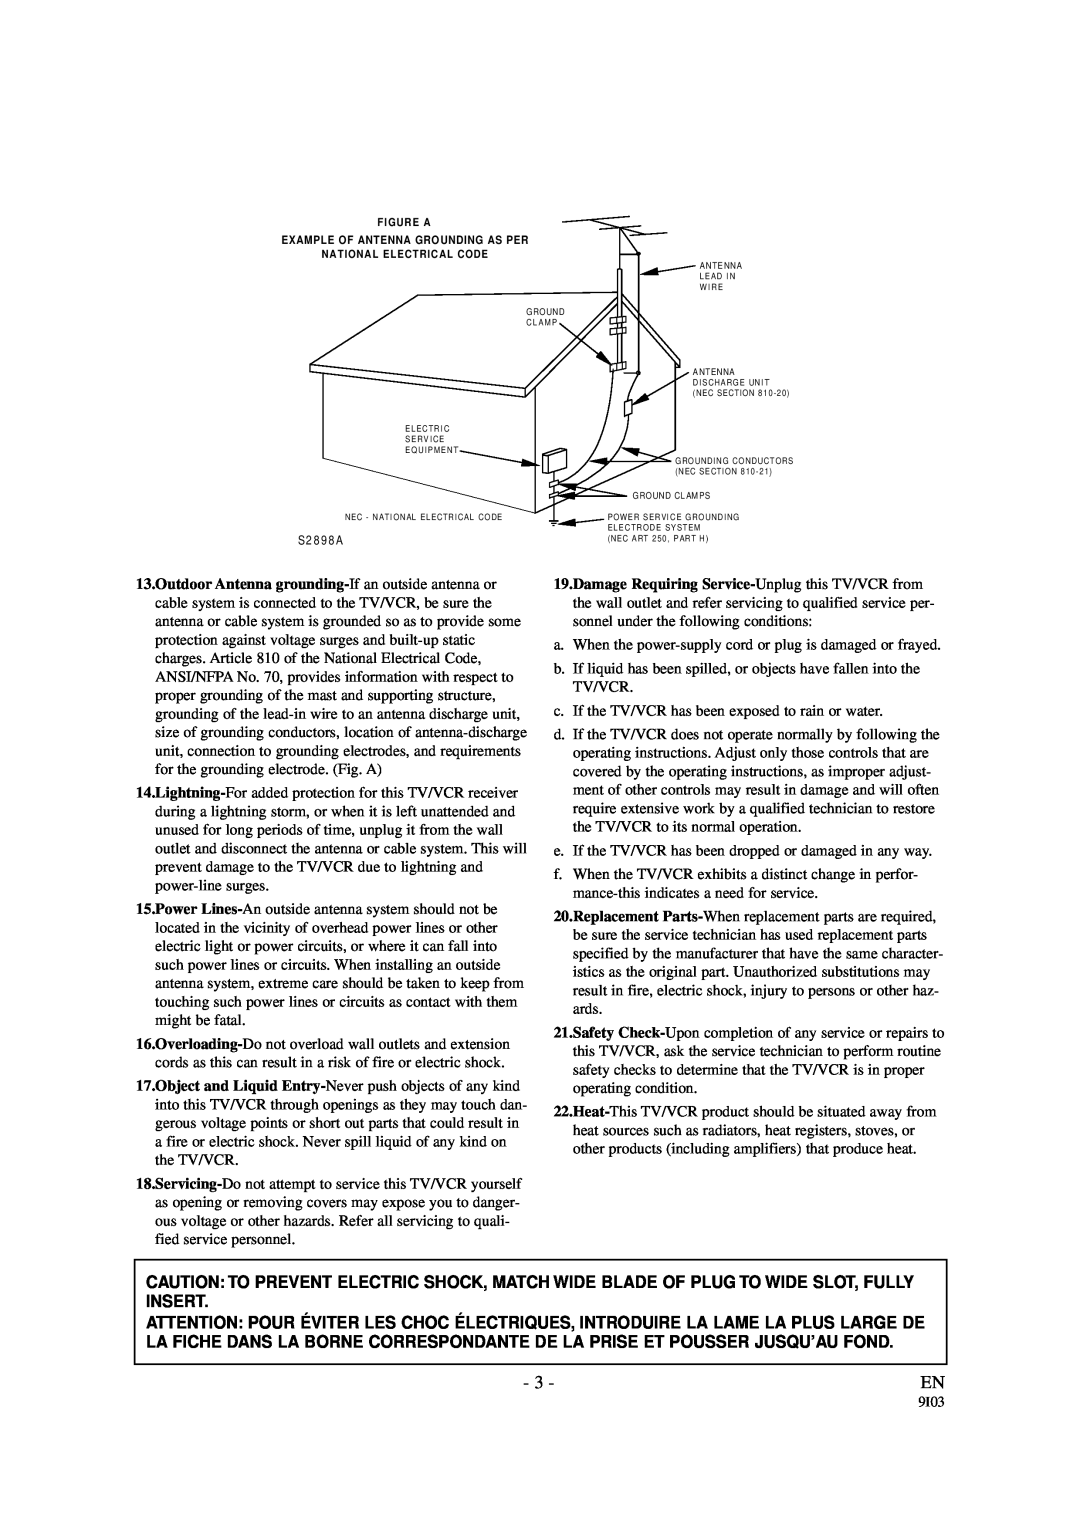 Emerson EWC1901 owner manual S2 8 9 8 A, F Igure A Example Of Antenna Grounding As Per, National Elect Rical Code 